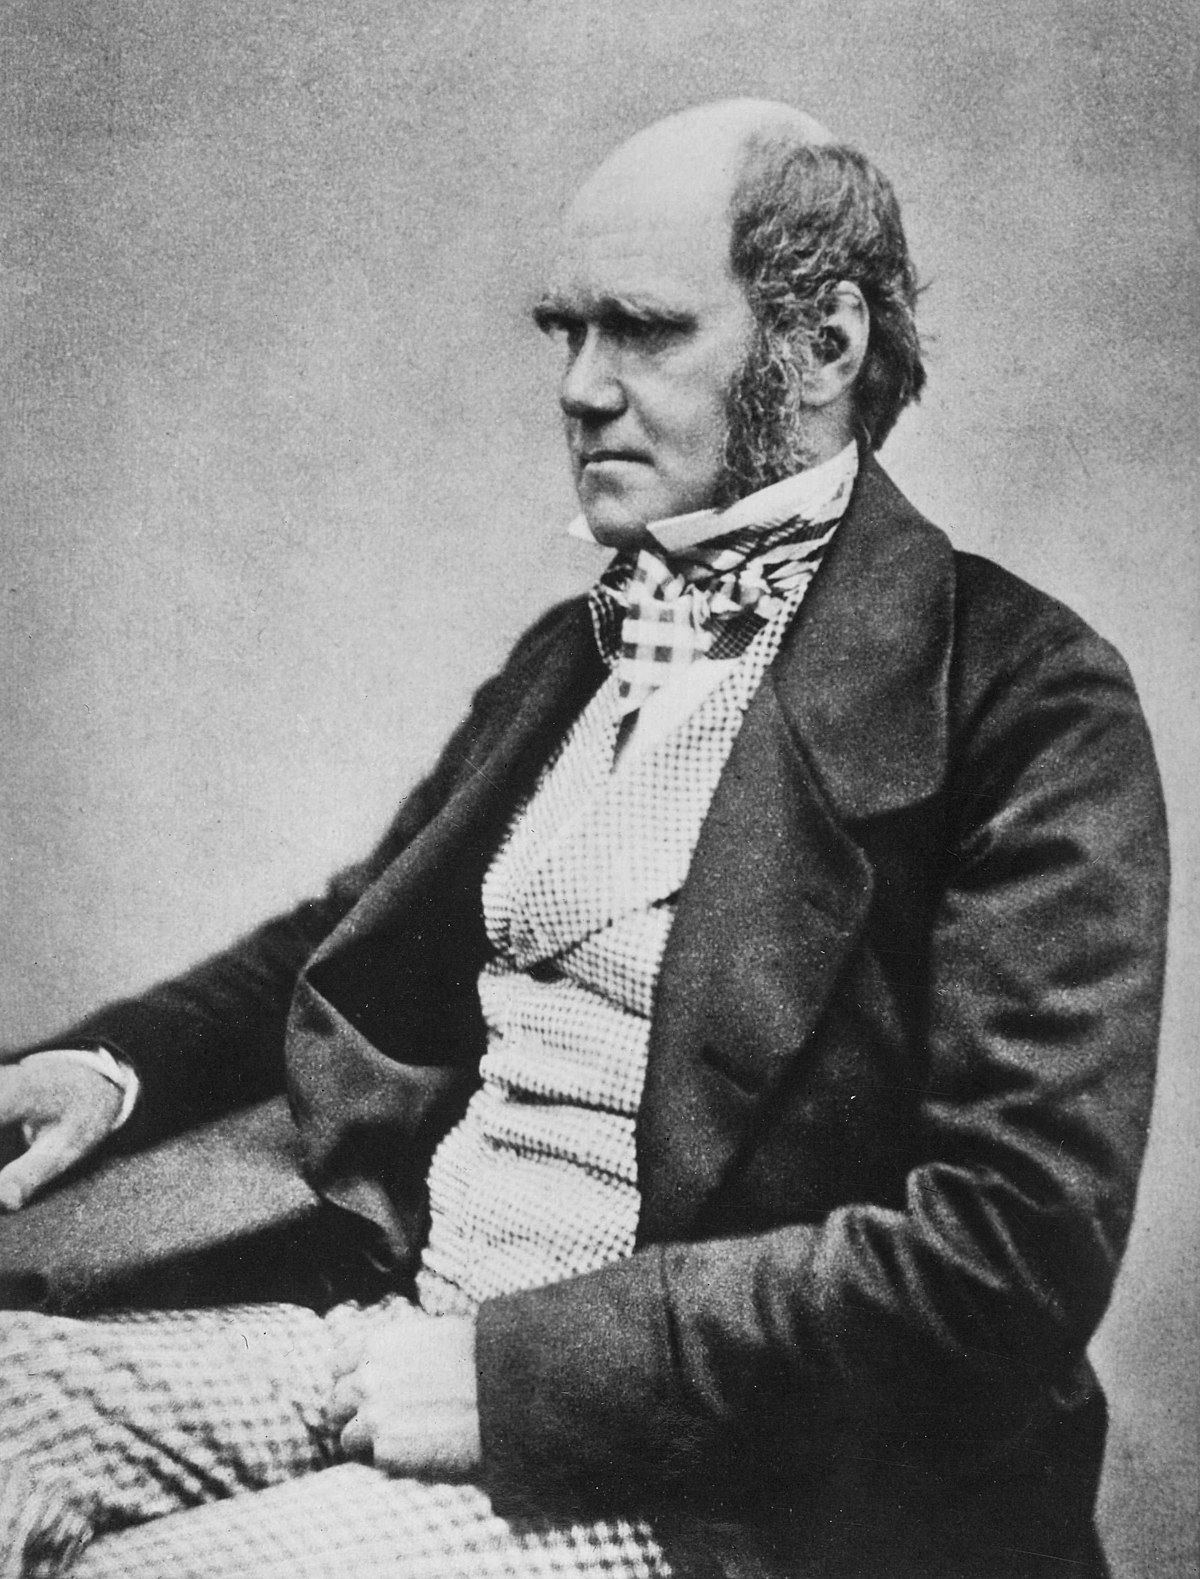 Charles Darwin in the 19th Century: The Evolutionary Pioneer and His Impact on Science